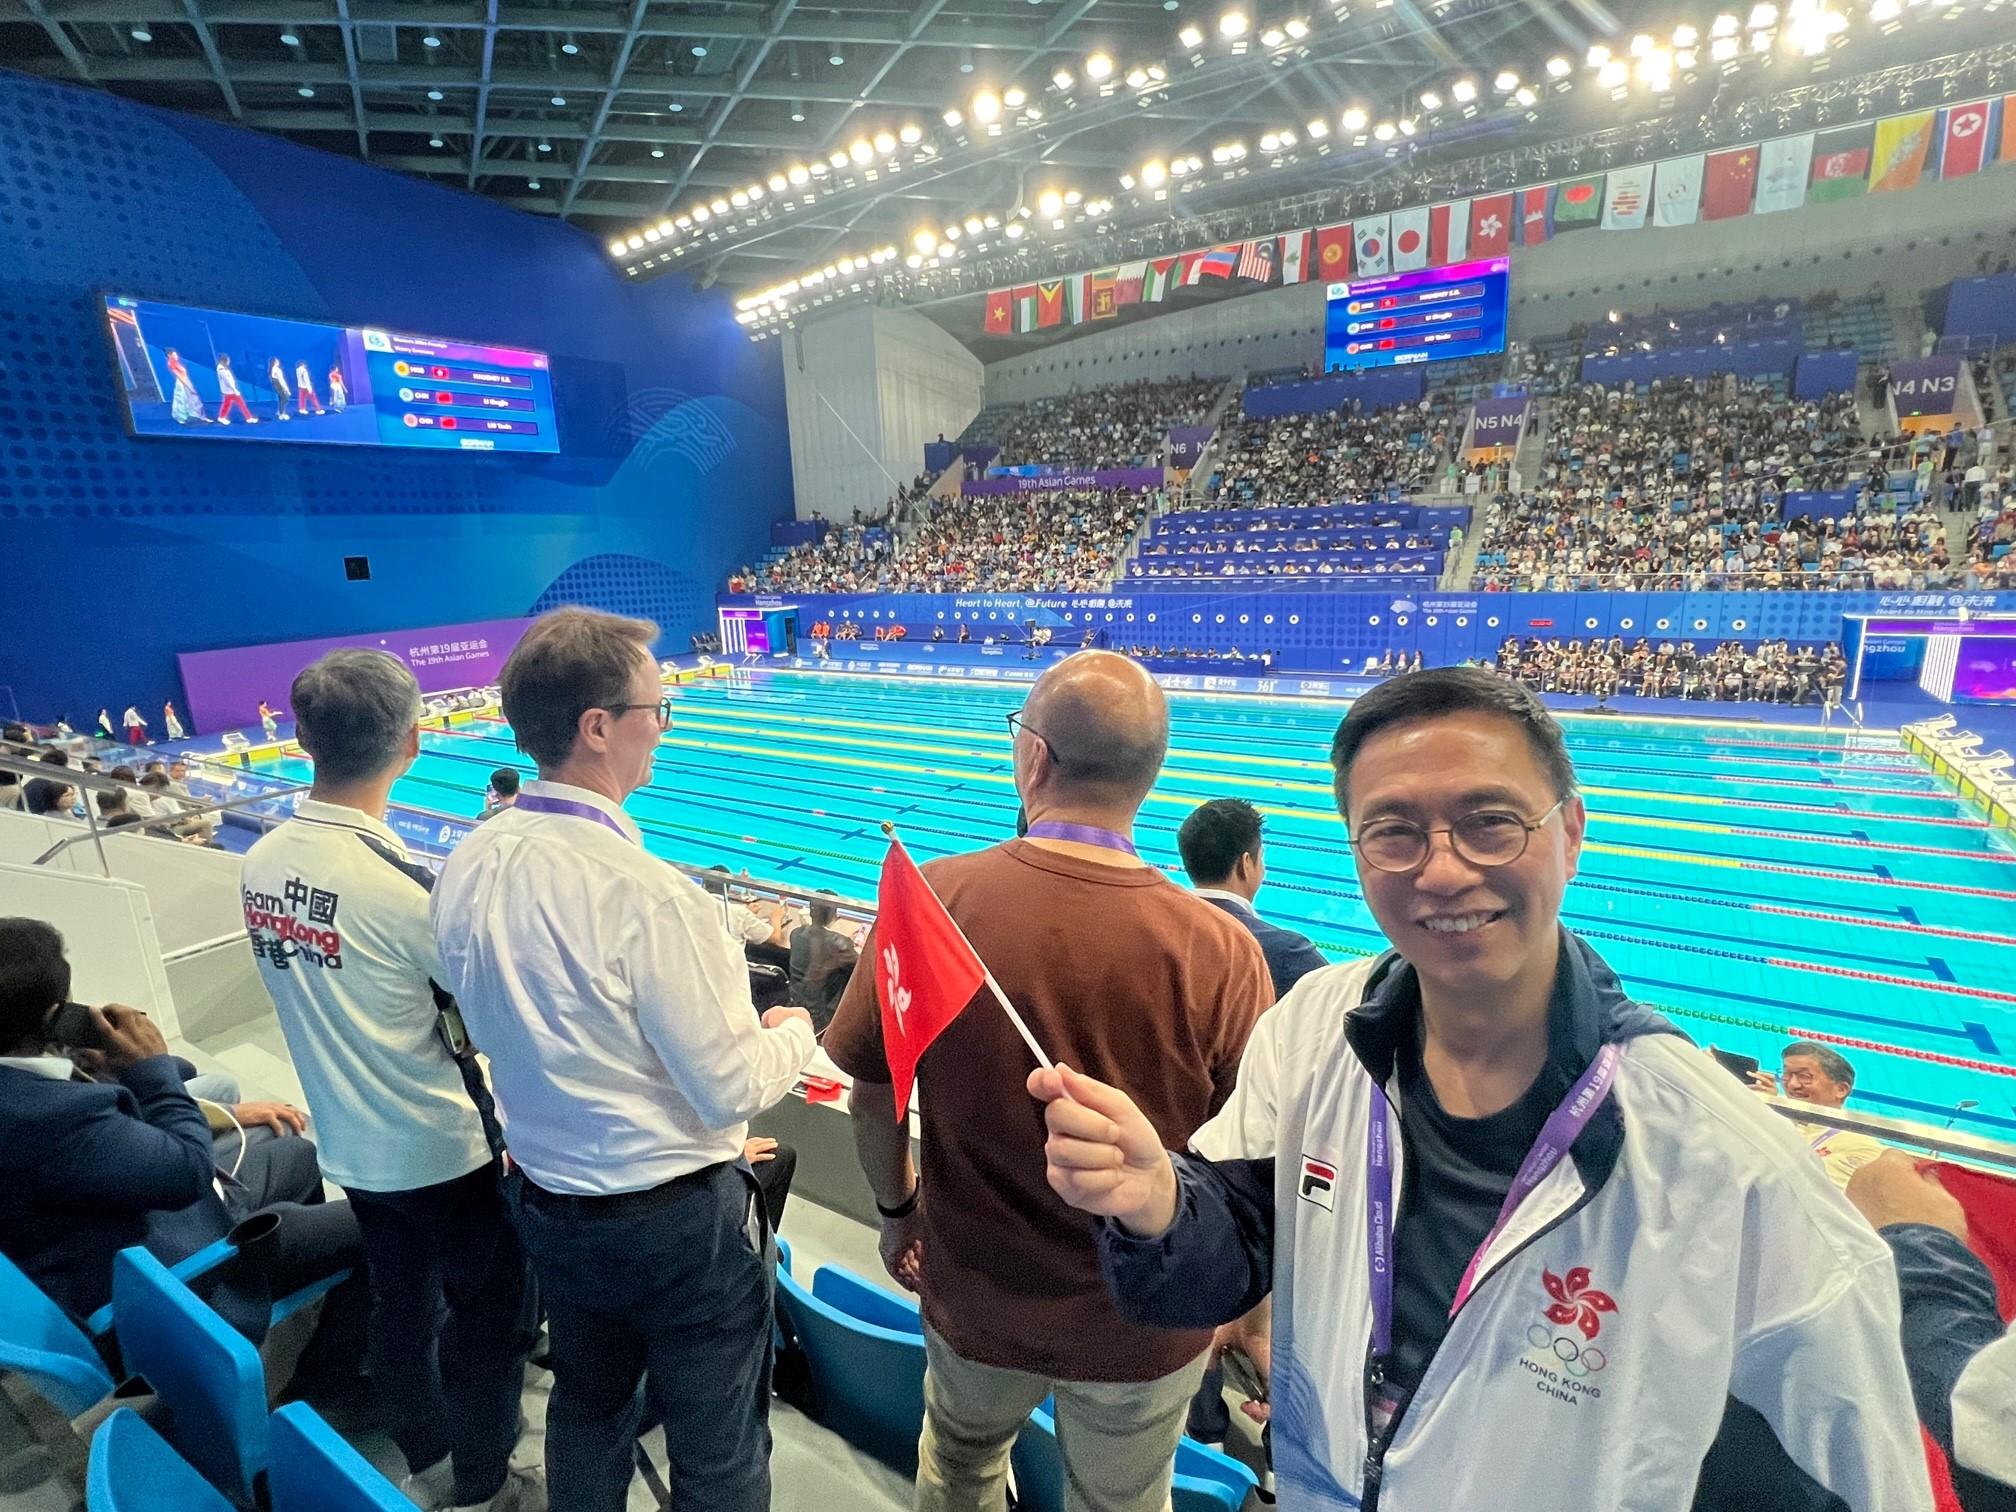 The Secretary for Culture, Sports and Tourism, Mr Kevin Yeung, watched several events in the Hangzhou Olympic Sports Centre Aquatic Sports Arena today (September 25).